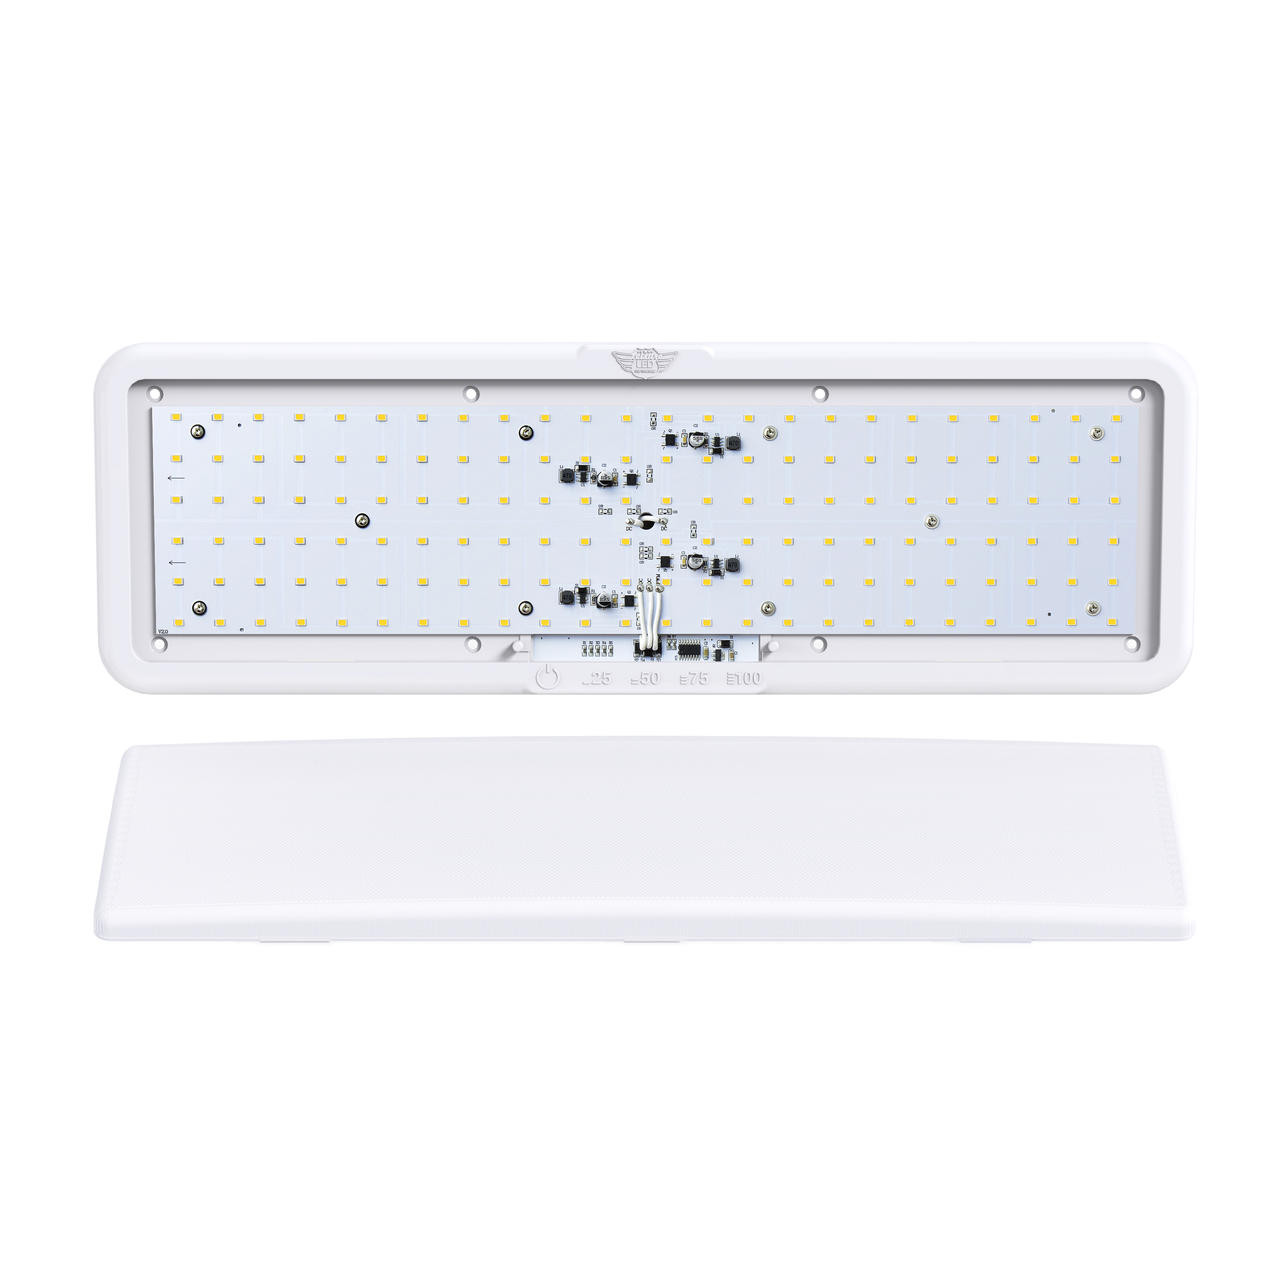 Leisure LED LED RV LED Ceiling Interior Light Fixture 1450 Lumen with Touch Dimmer Switch 12V 20 x 6 Natural White 4000-4500K With White Trim